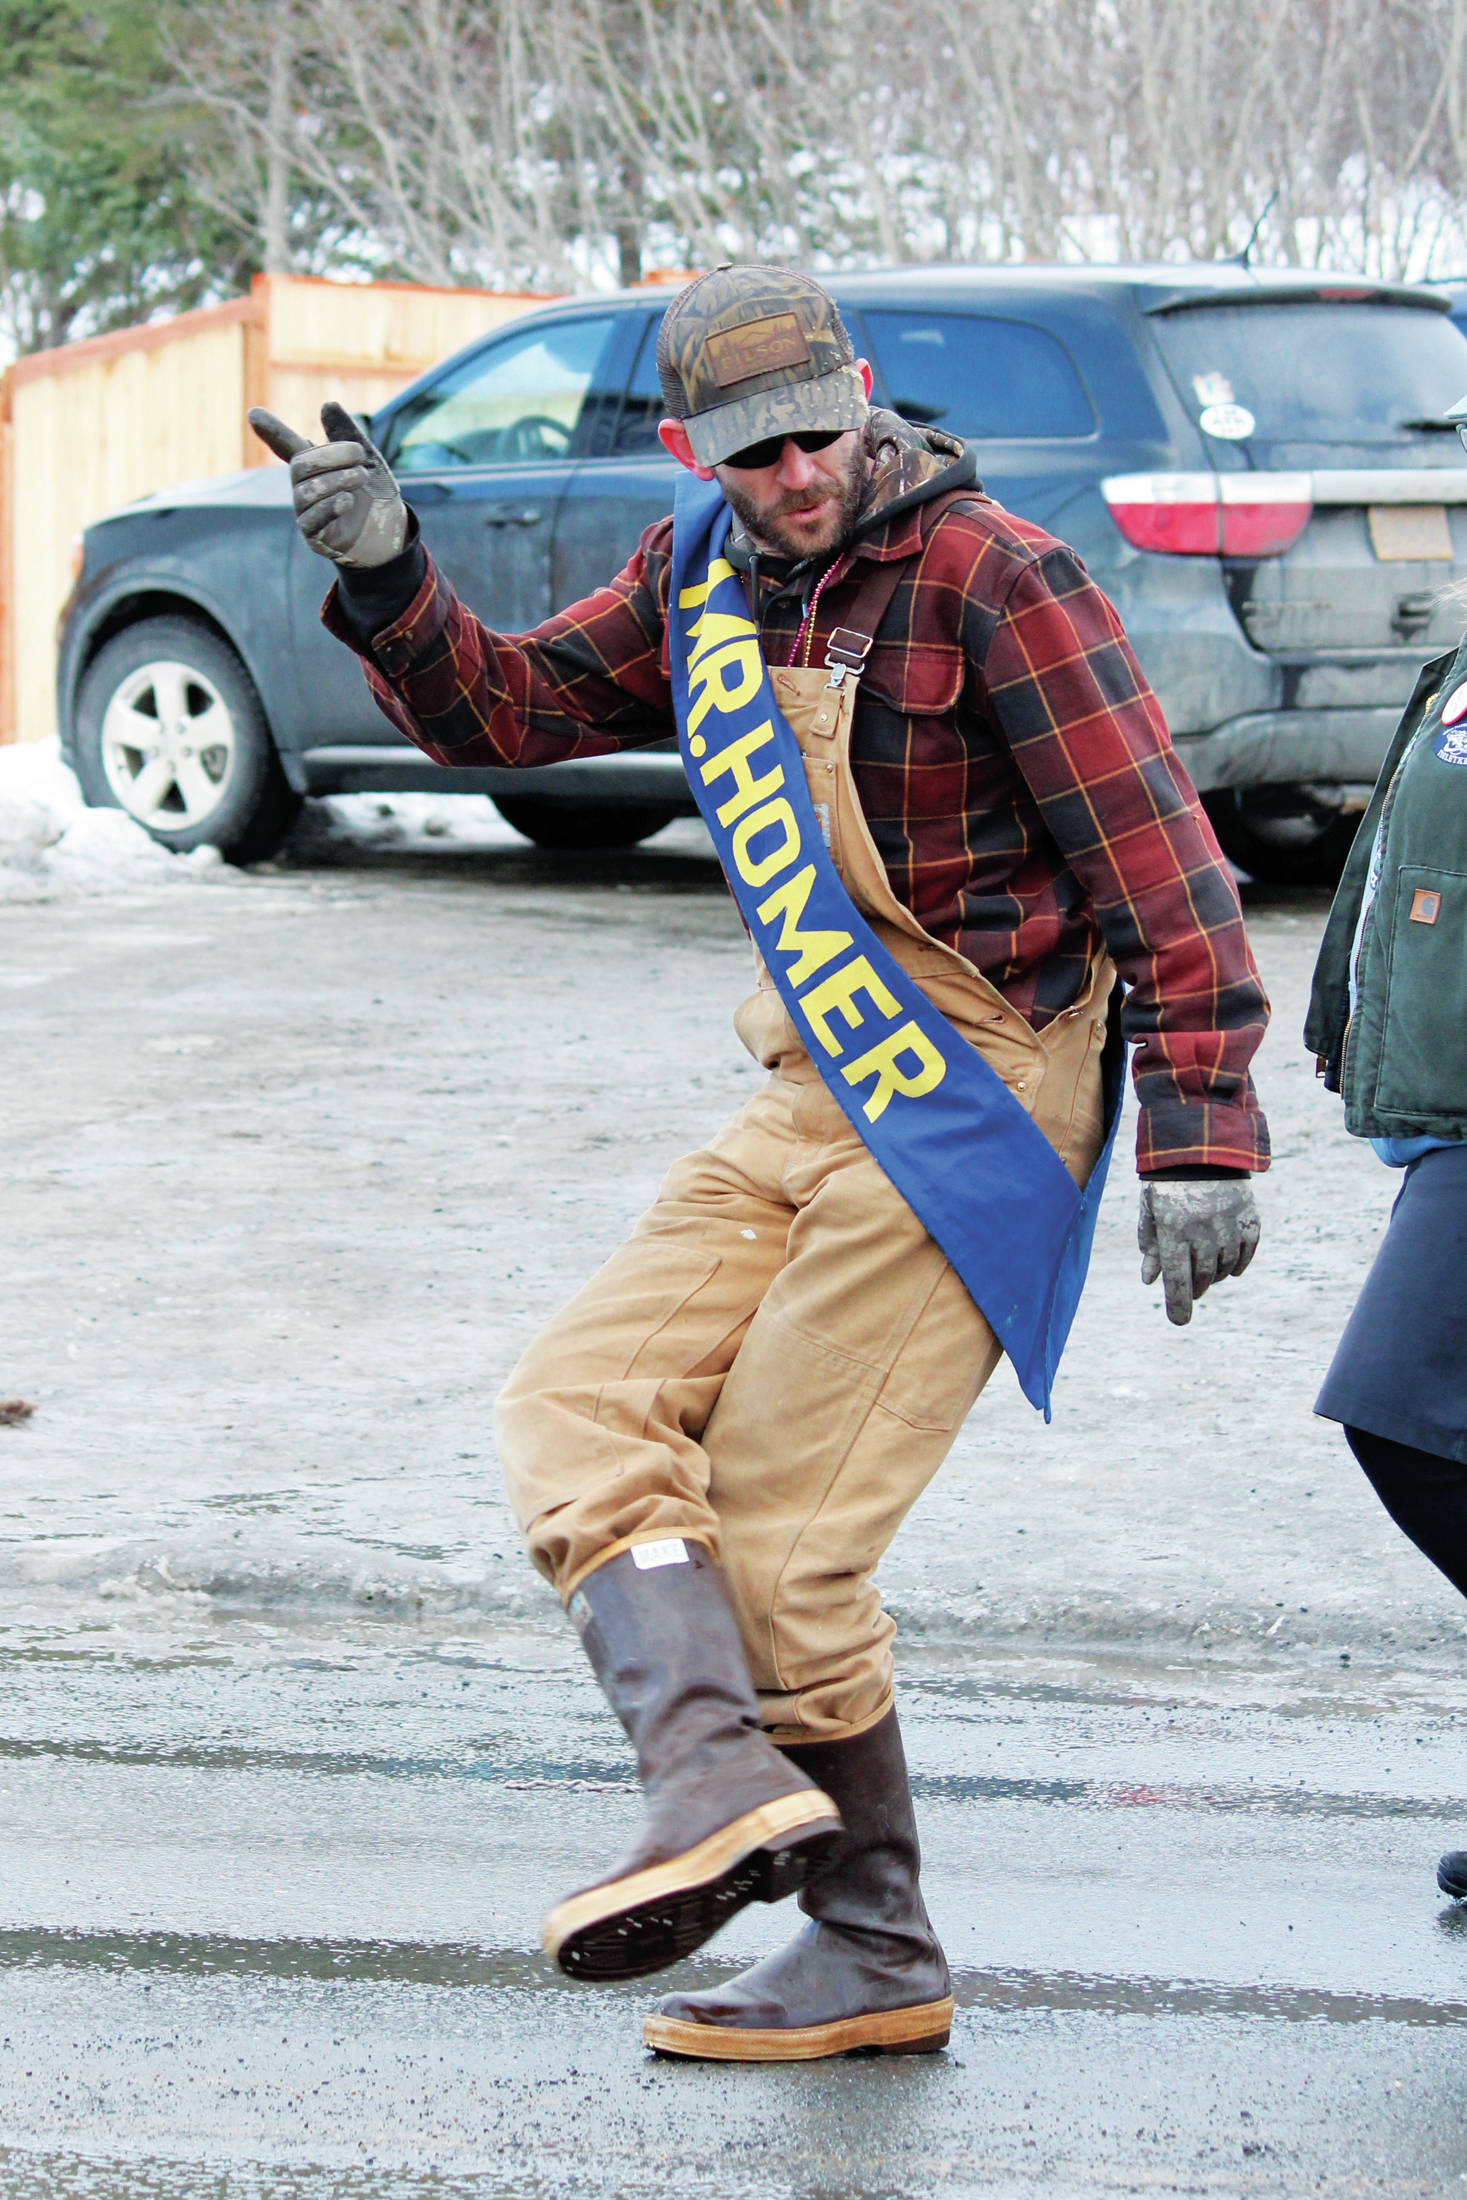 Jim Maloney, this year’s winner of the Mr. Homer Contest, marches down Pioneer Avenue in this year’s Homer Winter Carnival Parade on Saturday, Feb. 8, 2020 in Homer, Alaska. (Photo by Megan Pacer/Homer News)